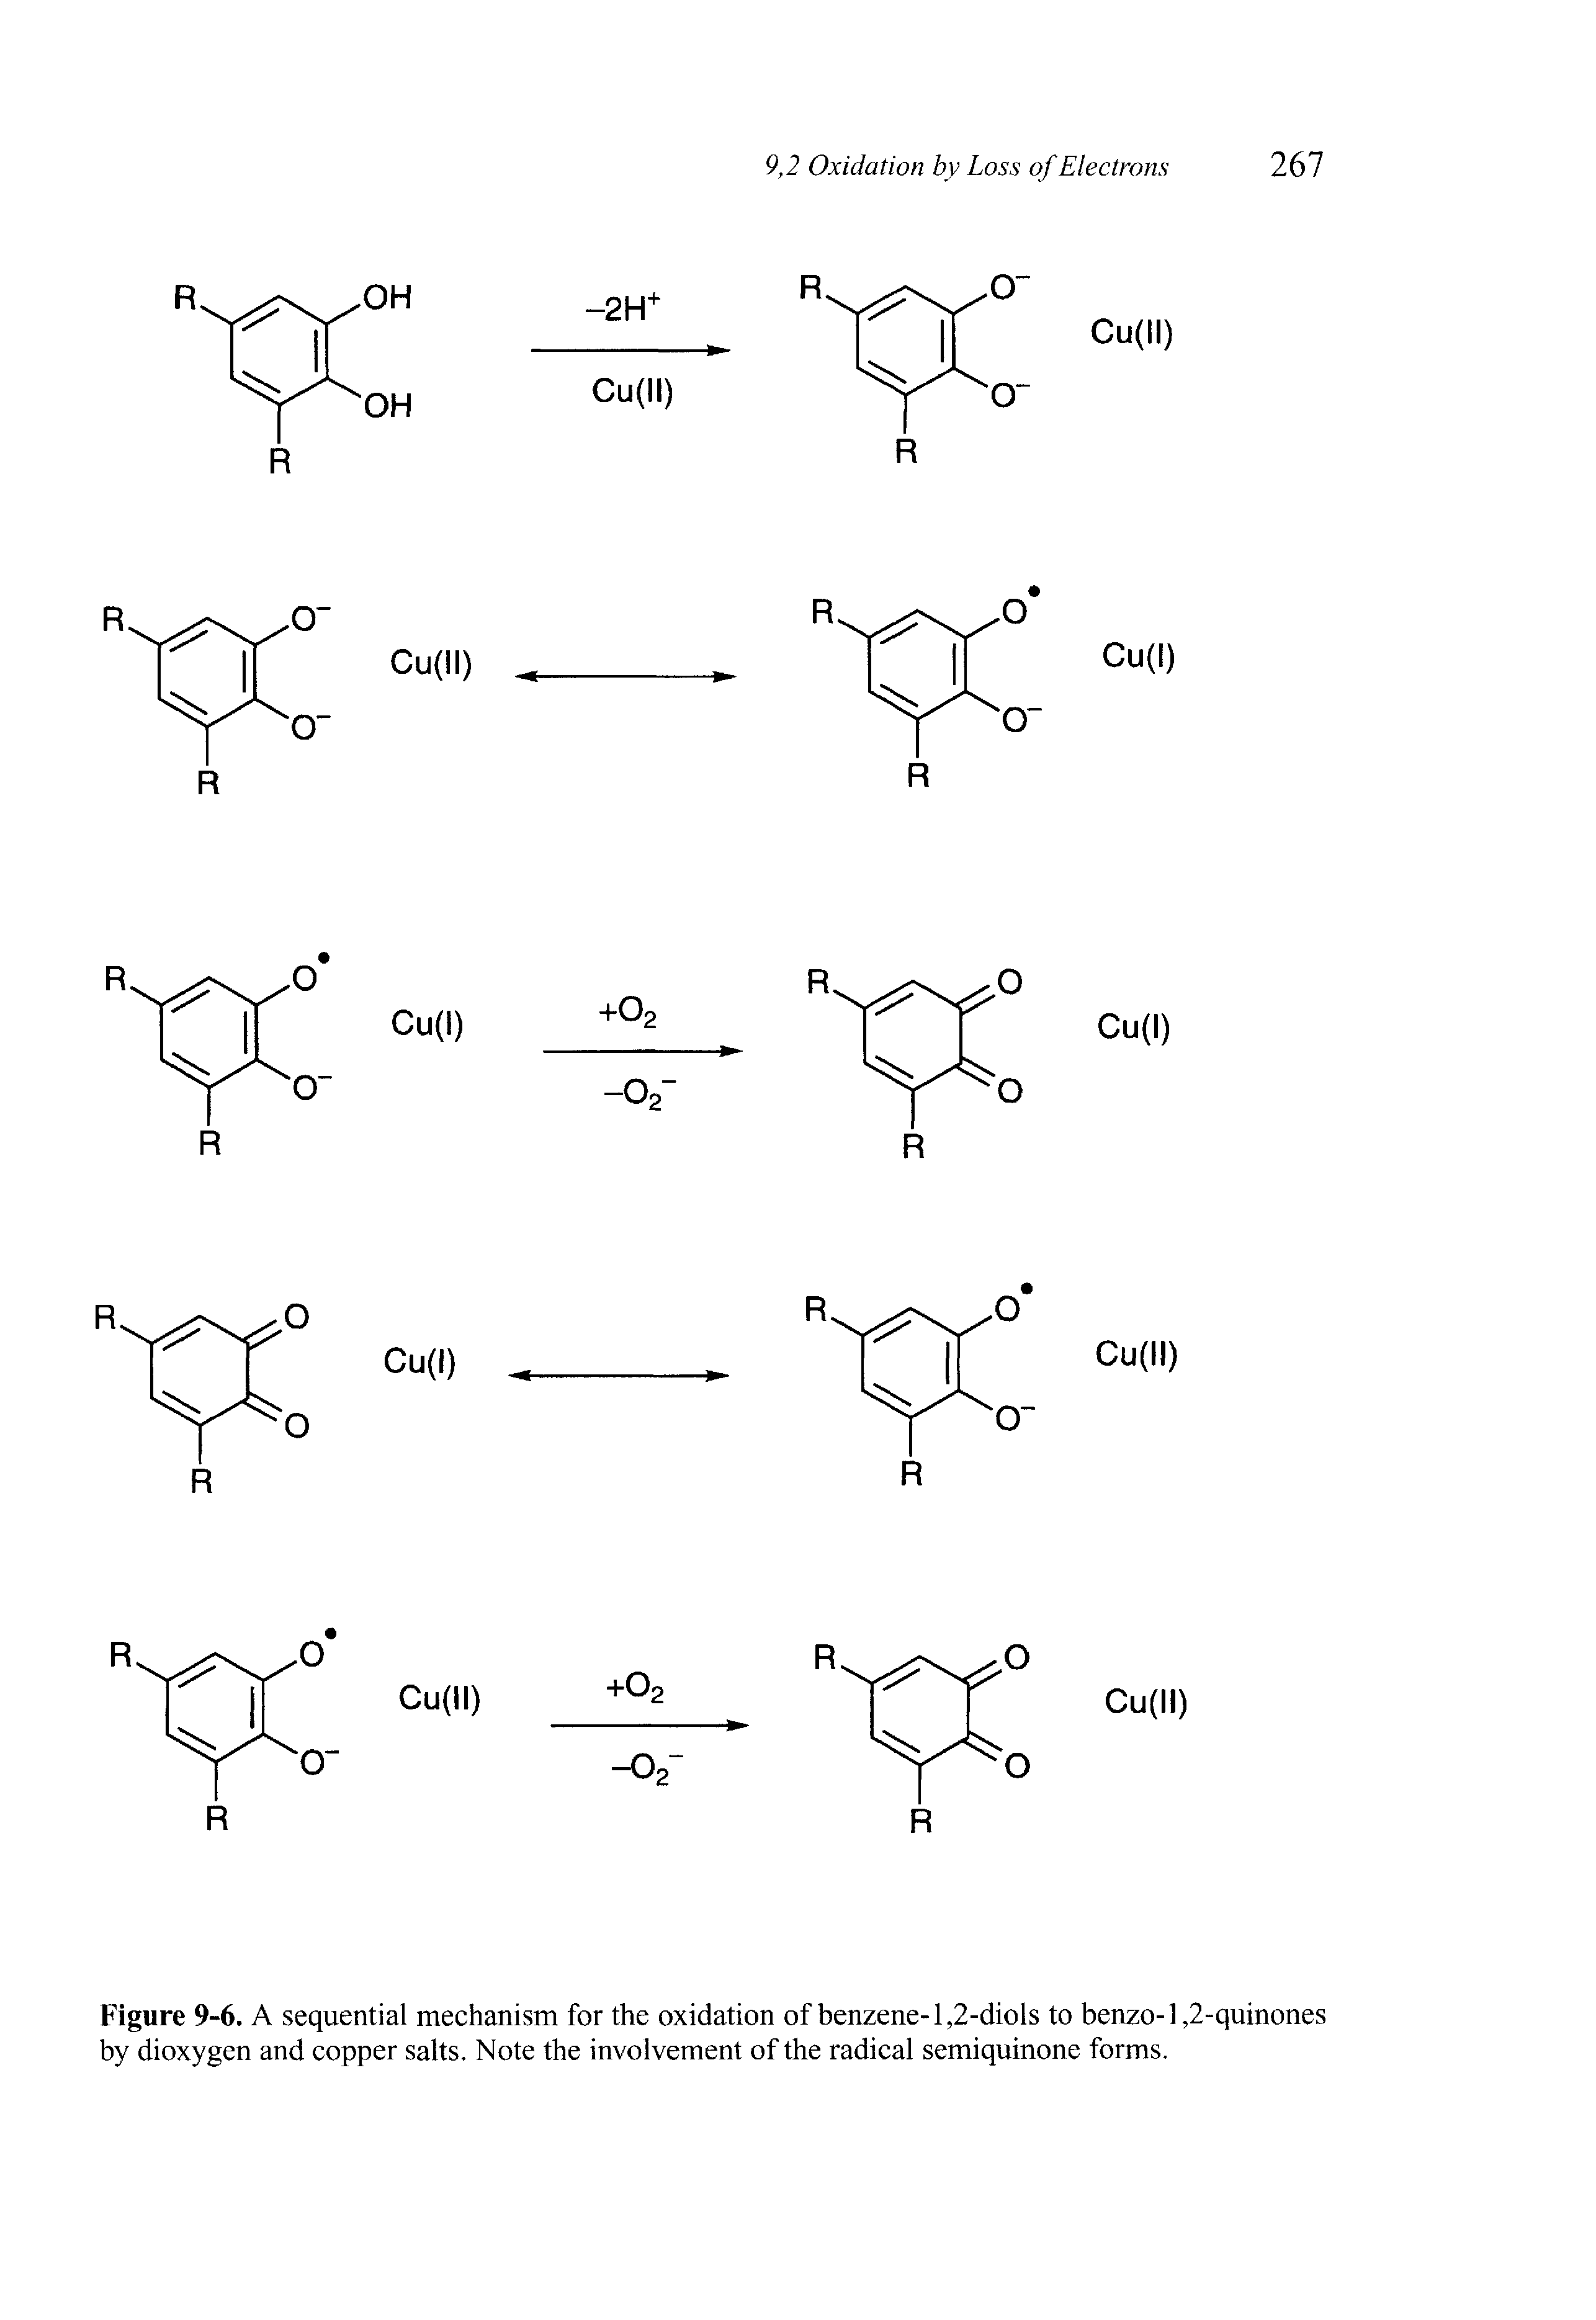 Figure 9-6. A sequential mechanism for the oxidation of benzene- 1,2-diols to benzo-l,2-quinones by dioxygen and copper salts. Note the involvement of the radical semiquinone forms.